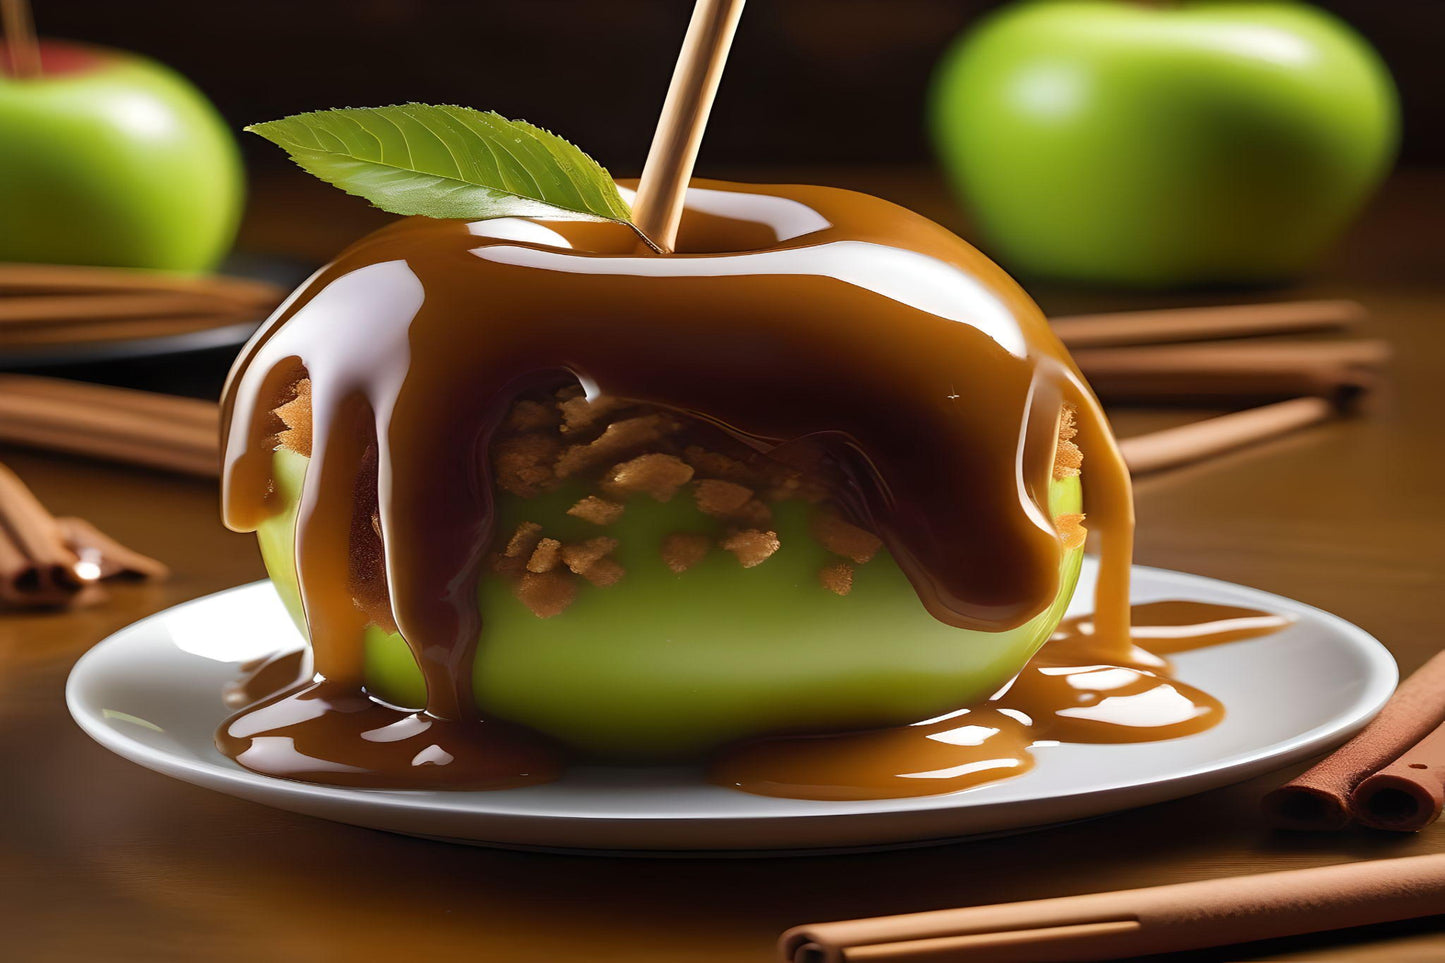 CARAMEL APPLE - A tantalizing blend of crisp apple, rich caramel, and creamy vanilla with a hint of cinnamon. It's like biting into a freshly made caramel apple!  Available in Perfume Oil, Body Spray, Body Oil, Lotion